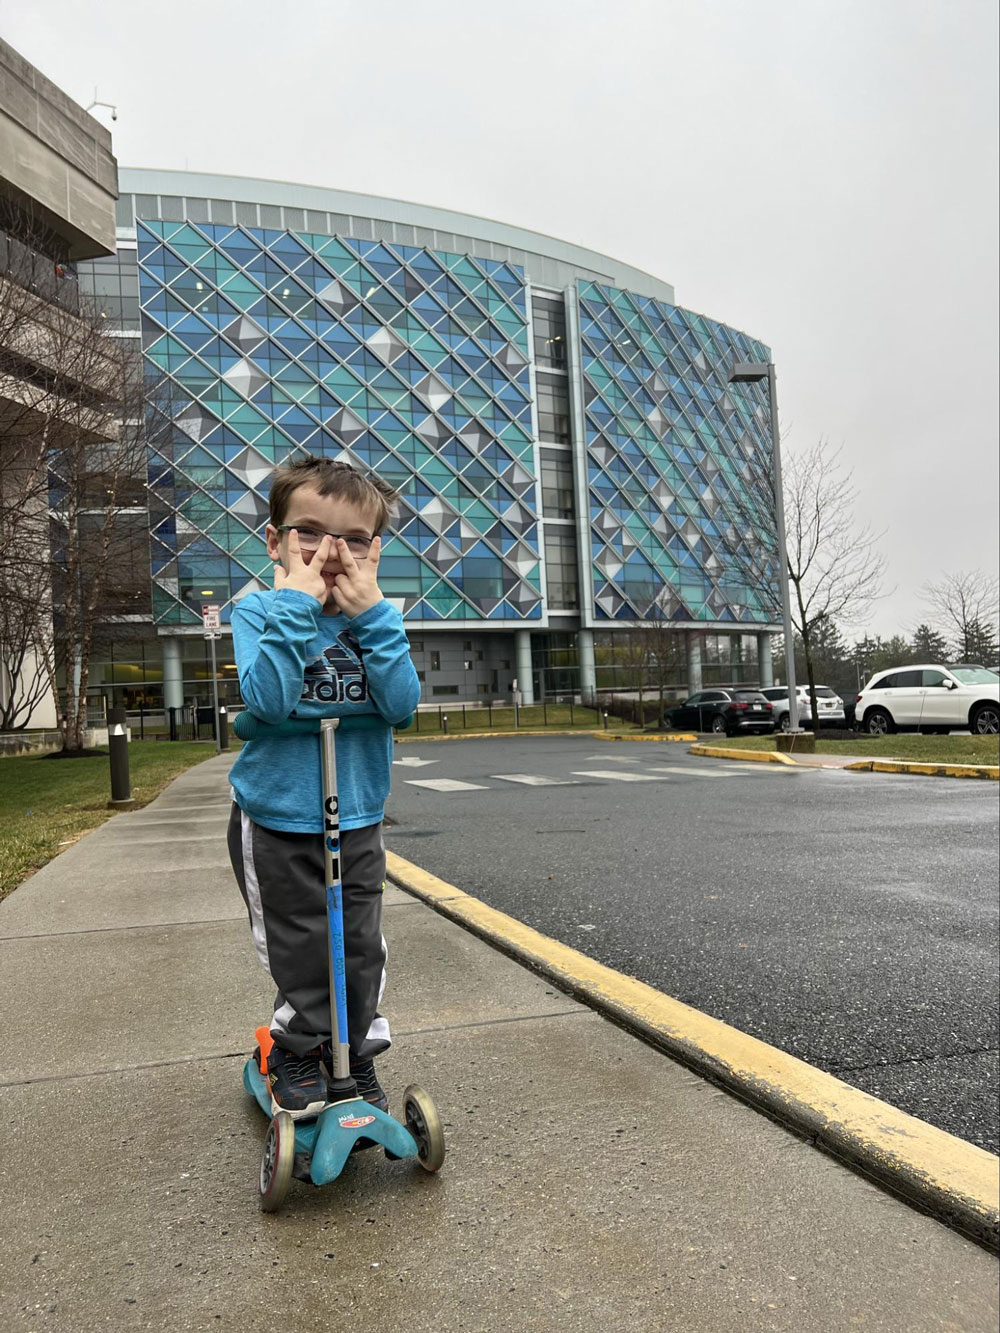 The Ups and Downs of Simon’s first trip to Nemours